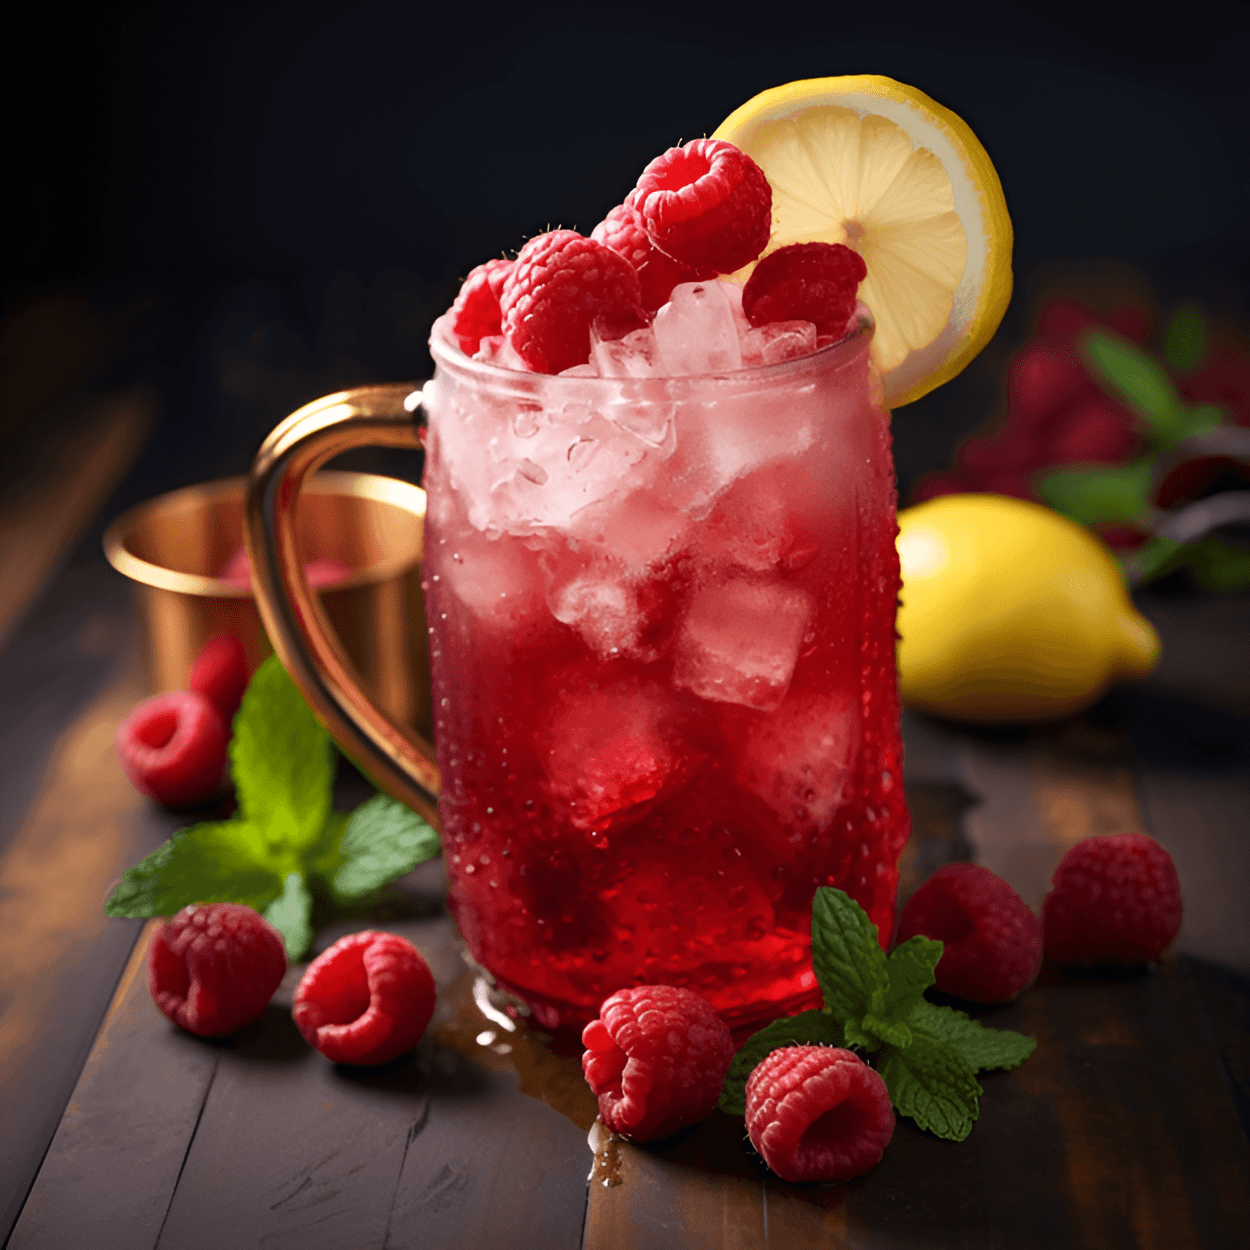 Raspberry Lemon Mule Cocktail Recipe - The Raspberry Lemon Mule has a refreshing, sweet, and slightly tart taste. The raspberry adds a sweet fruitiness, while the lemon gives it a sour kick. The ginger beer brings a spicy warmth that balances out the sweetness.